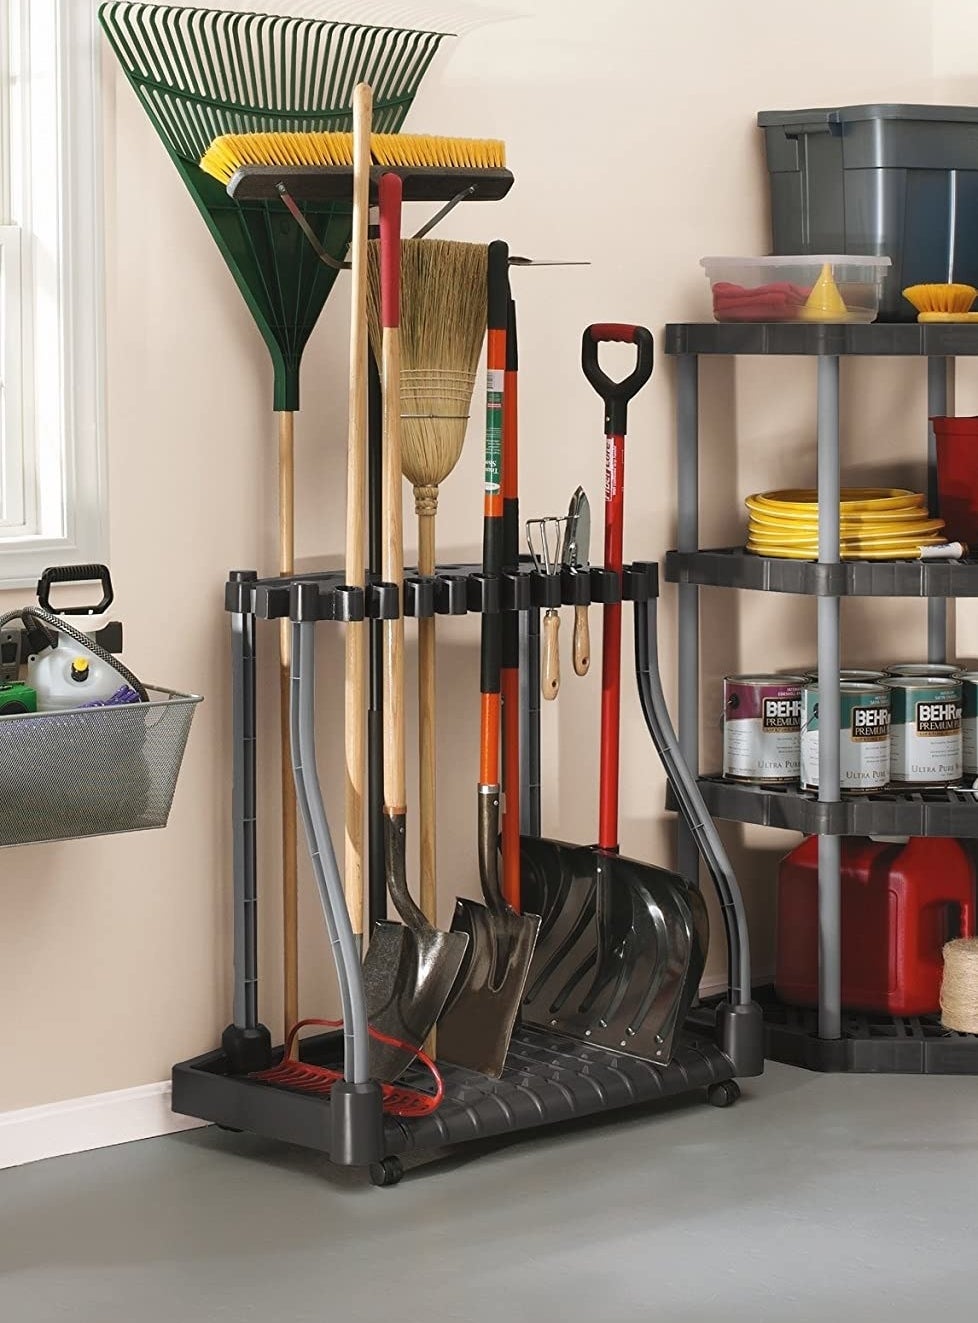 A black and gray plastic tool organizer on caster wheels holding rakes, shovels, and more outdoor tools